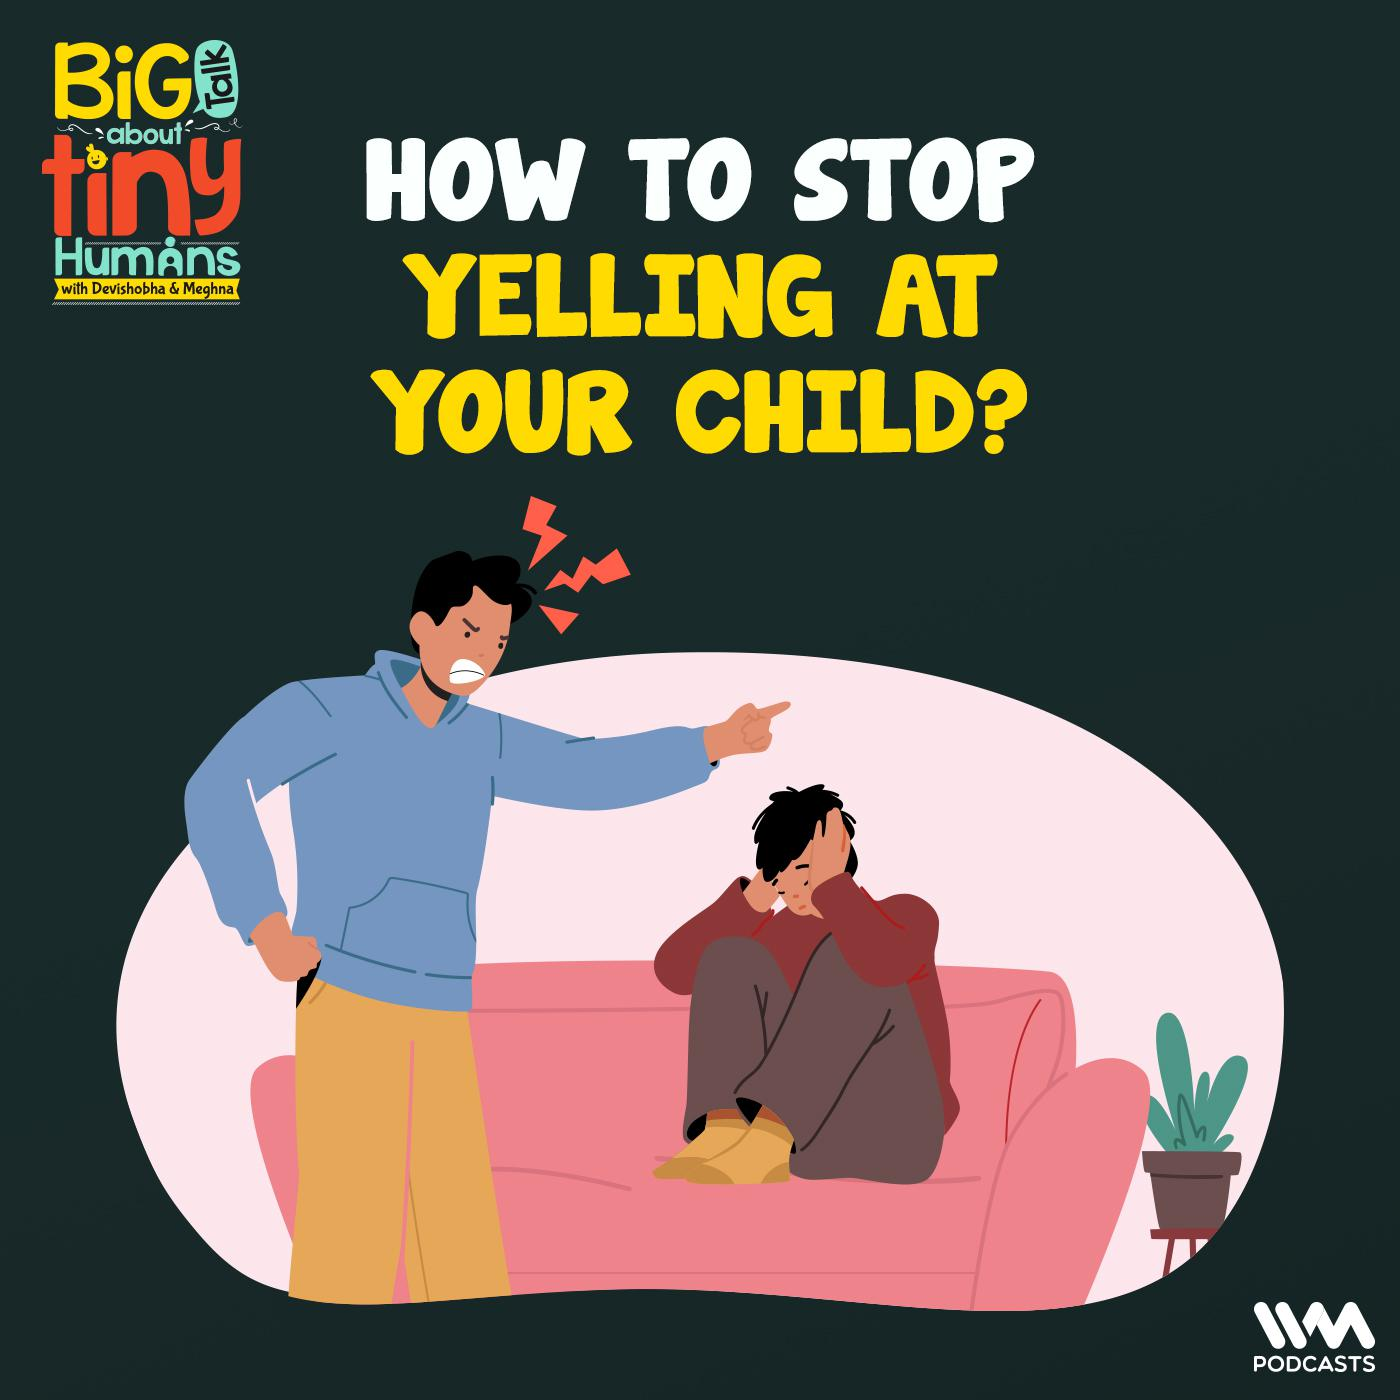 How to stop yelling at your child?